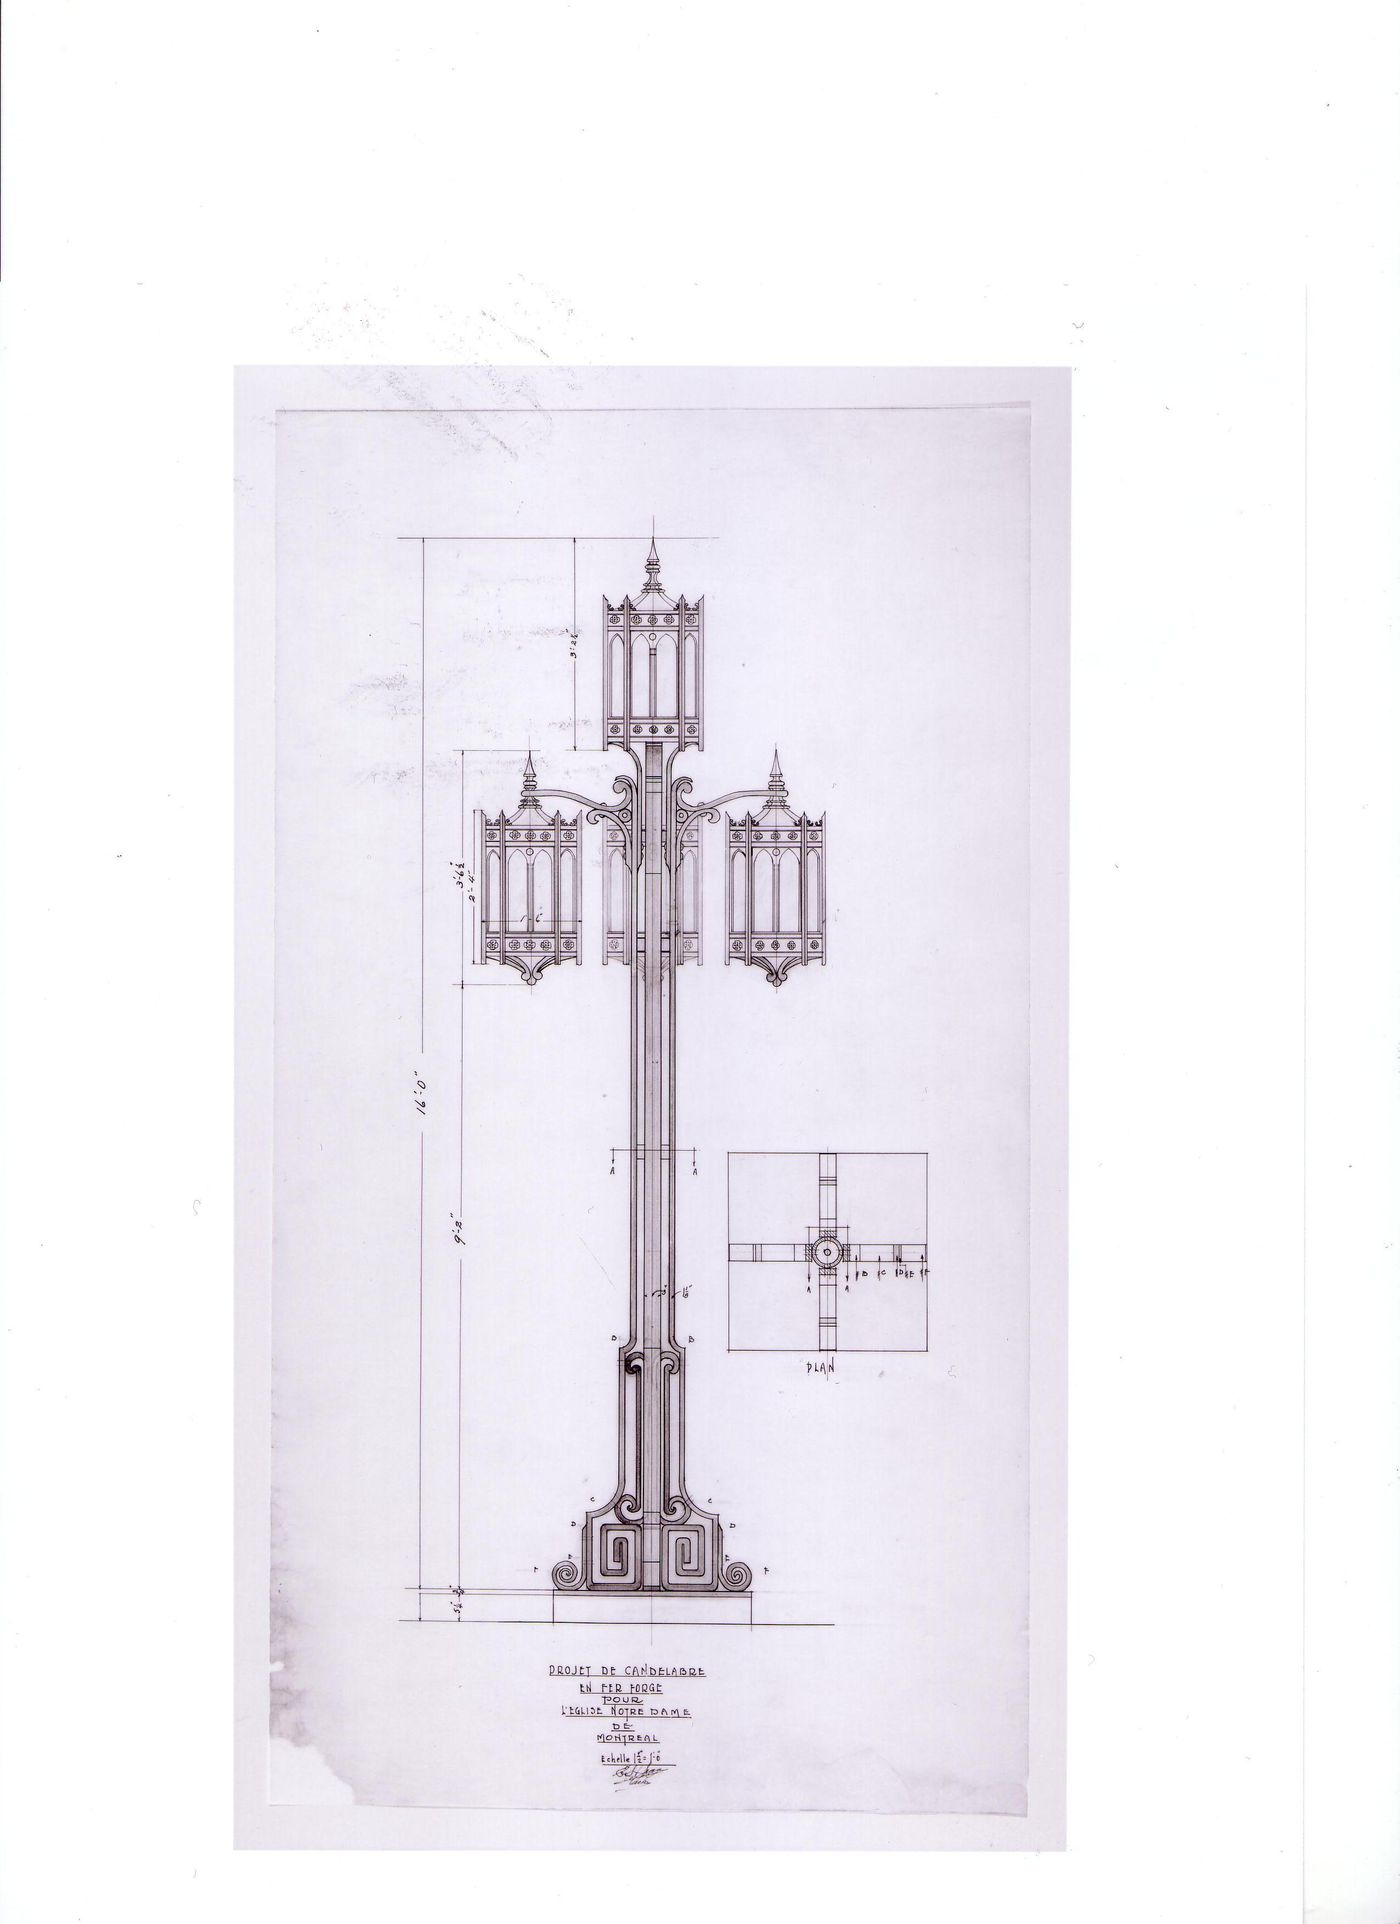 Plan and elevation for a wrought iron lamppost for Notre-Dame de Montréal